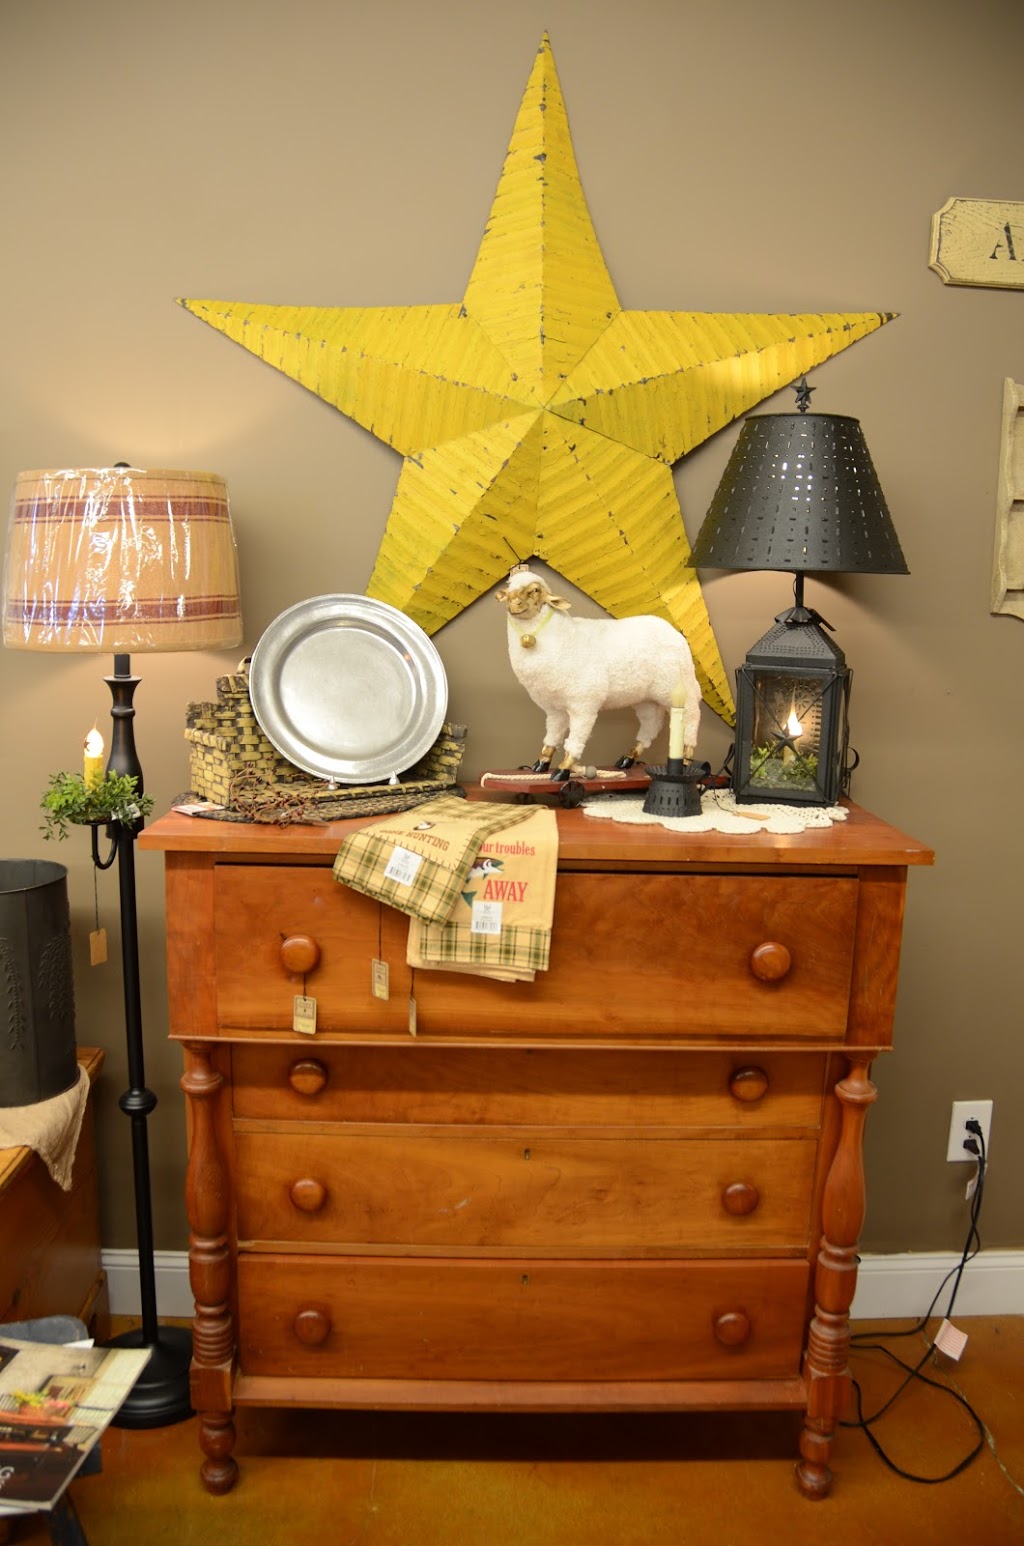 Country Traditions | 251 2nd Ave N, Franklin, TN 37064 | Phone: (540) 226-1267